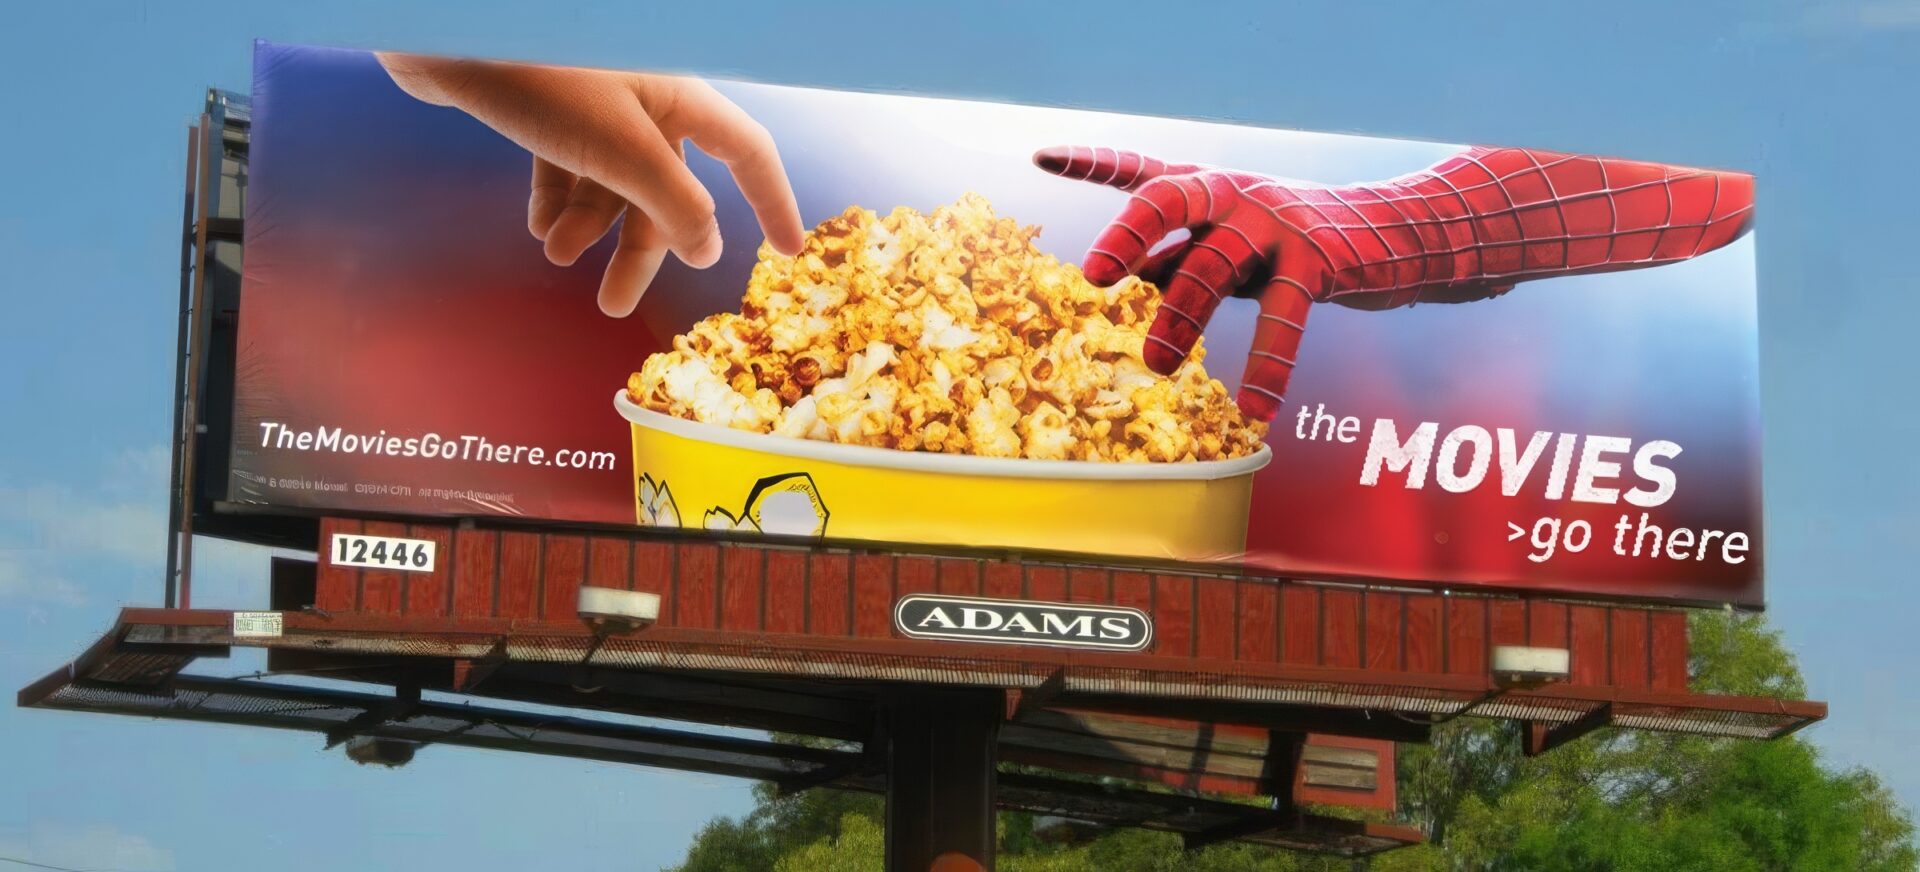 The Movies > Go there. Spiderman reaching for popcorn